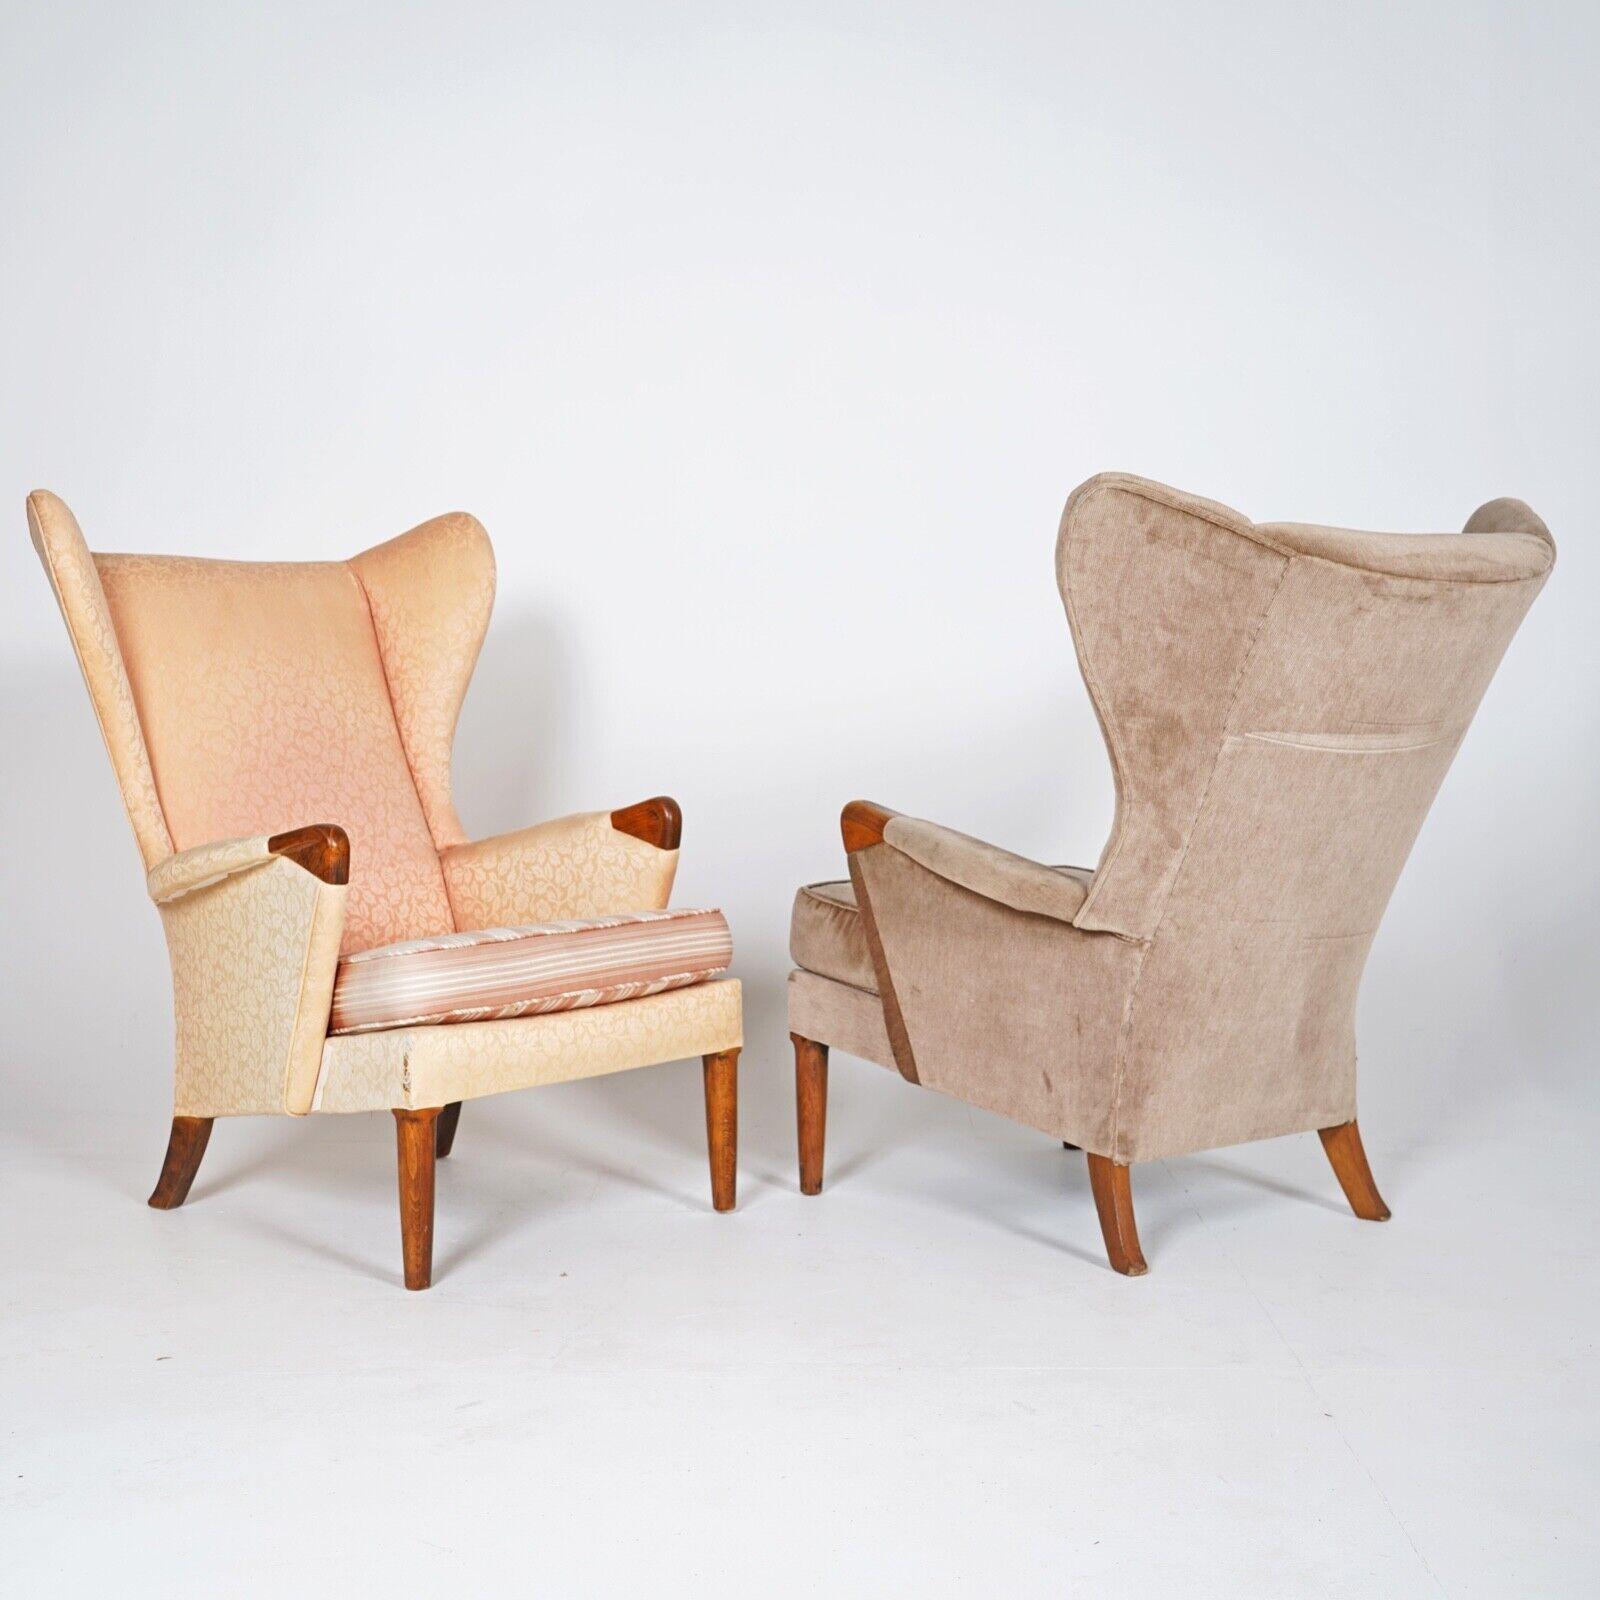 njoy making these Parker Parker Knoll 757 Wingback Armchairs your very own. These absolute British classic mid century design  chairs known as the 